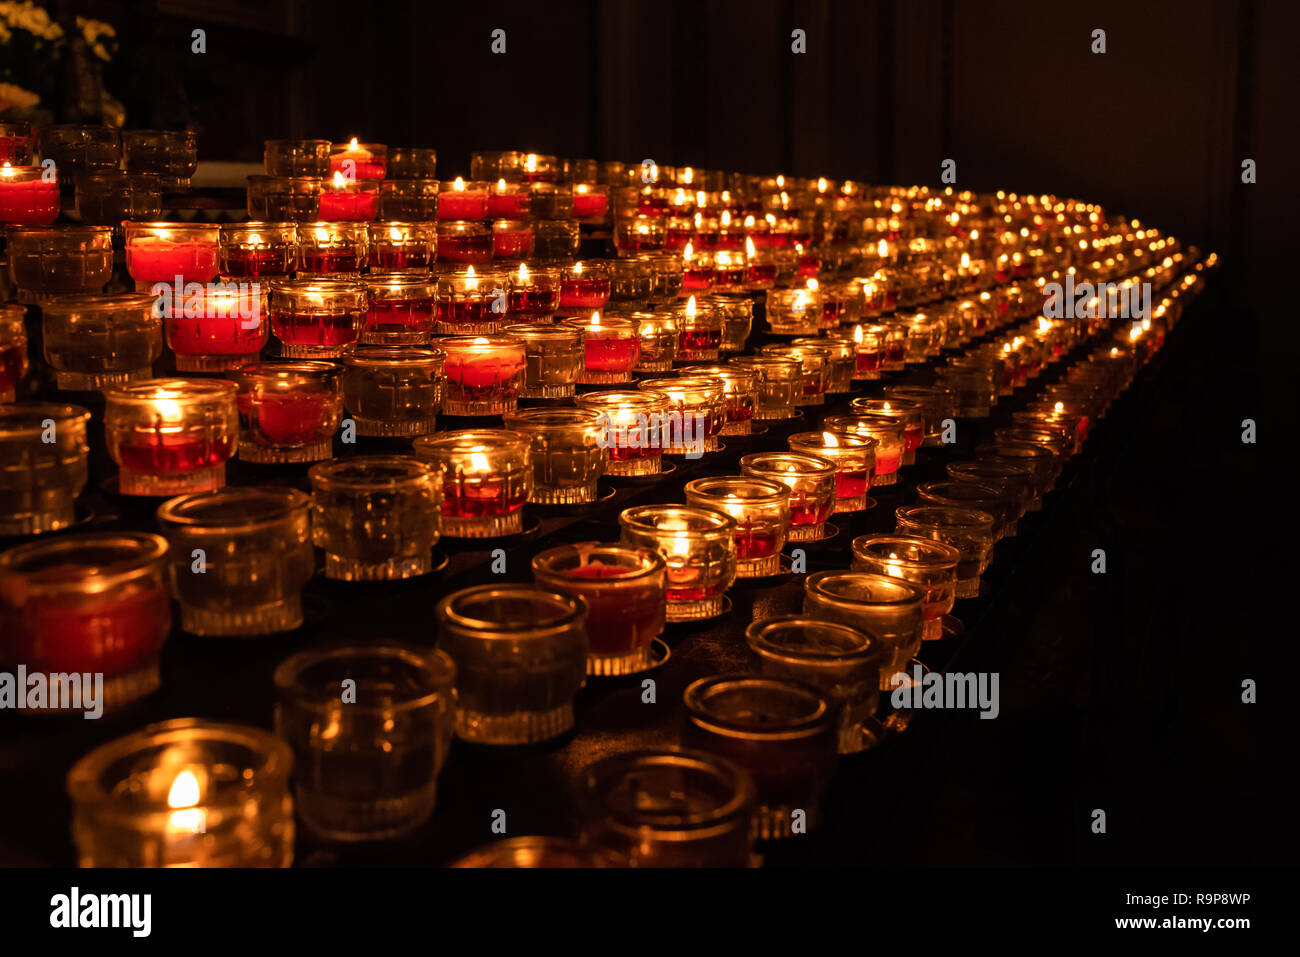 Holly Trinity candles, people commemoration Stock Photo